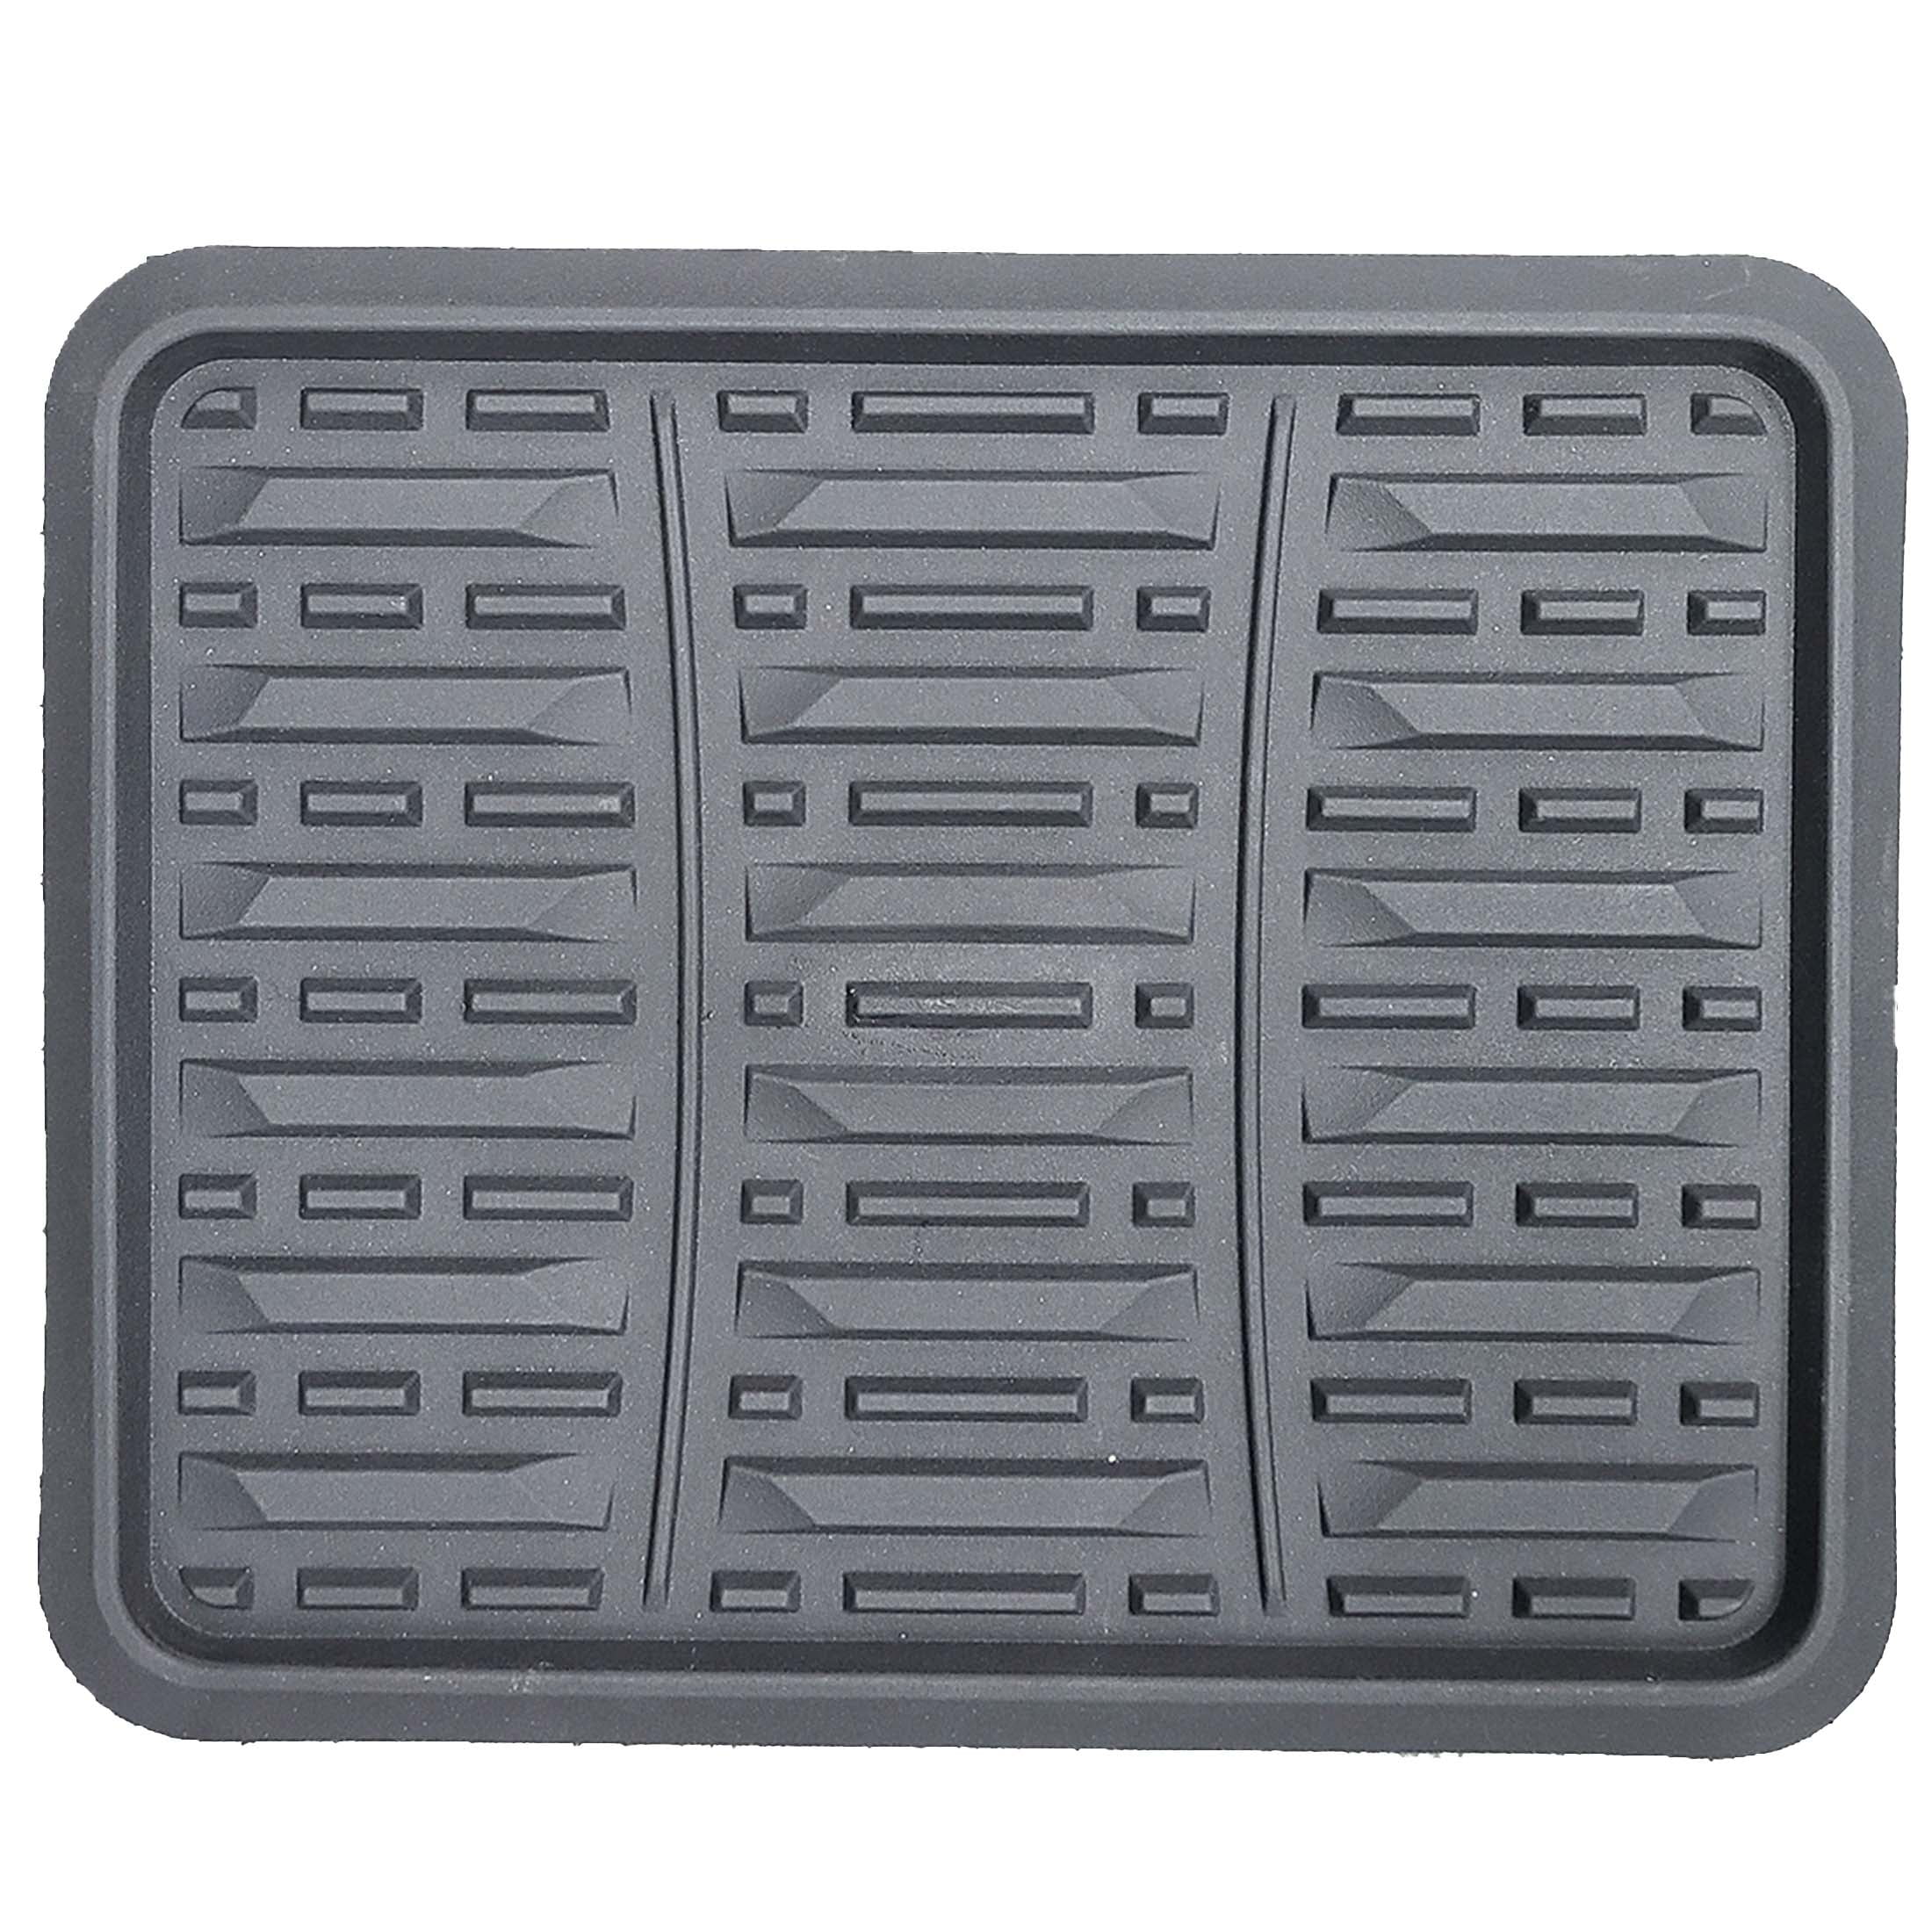 Auto Drive Year Around Rubber Protection AD PC Rear Floor Mat, FL57894B1-8,Black